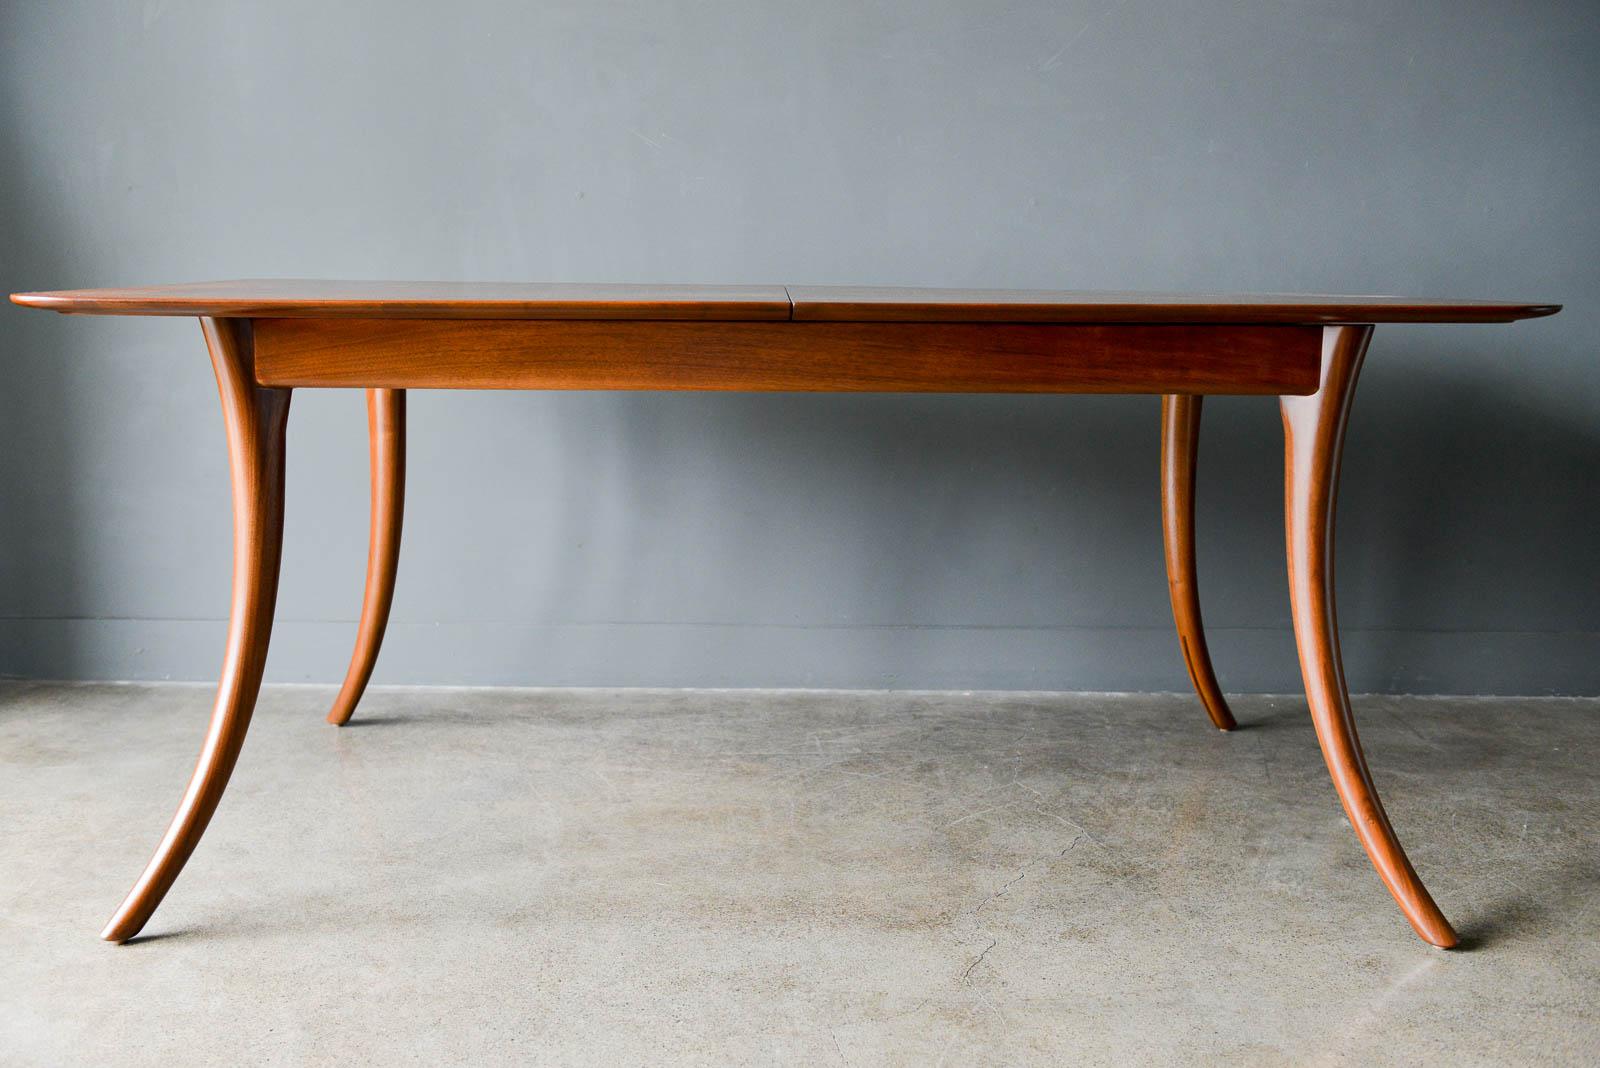 T.H. Robsjohn-Gibbings Klismos dining table, model 4301, ca. 1955. Beautiful and desirable sabre leg design professionally restored in showroom condition. Includes two 18